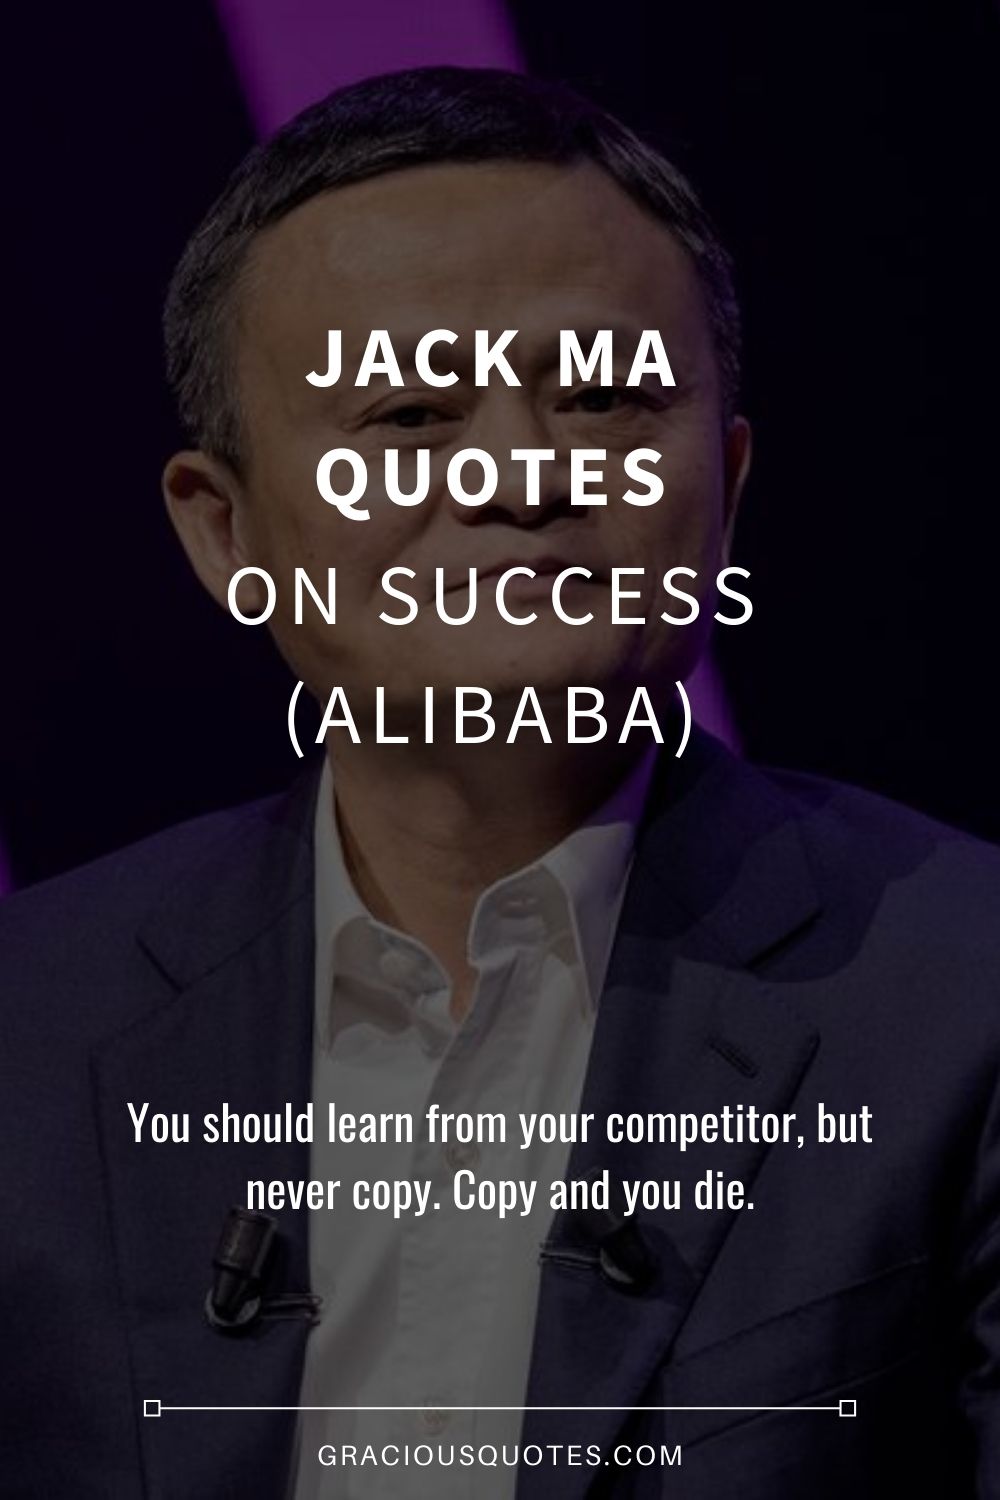 Jack Ma Quotes on Success (ALIBABA) - Gracious Quotes